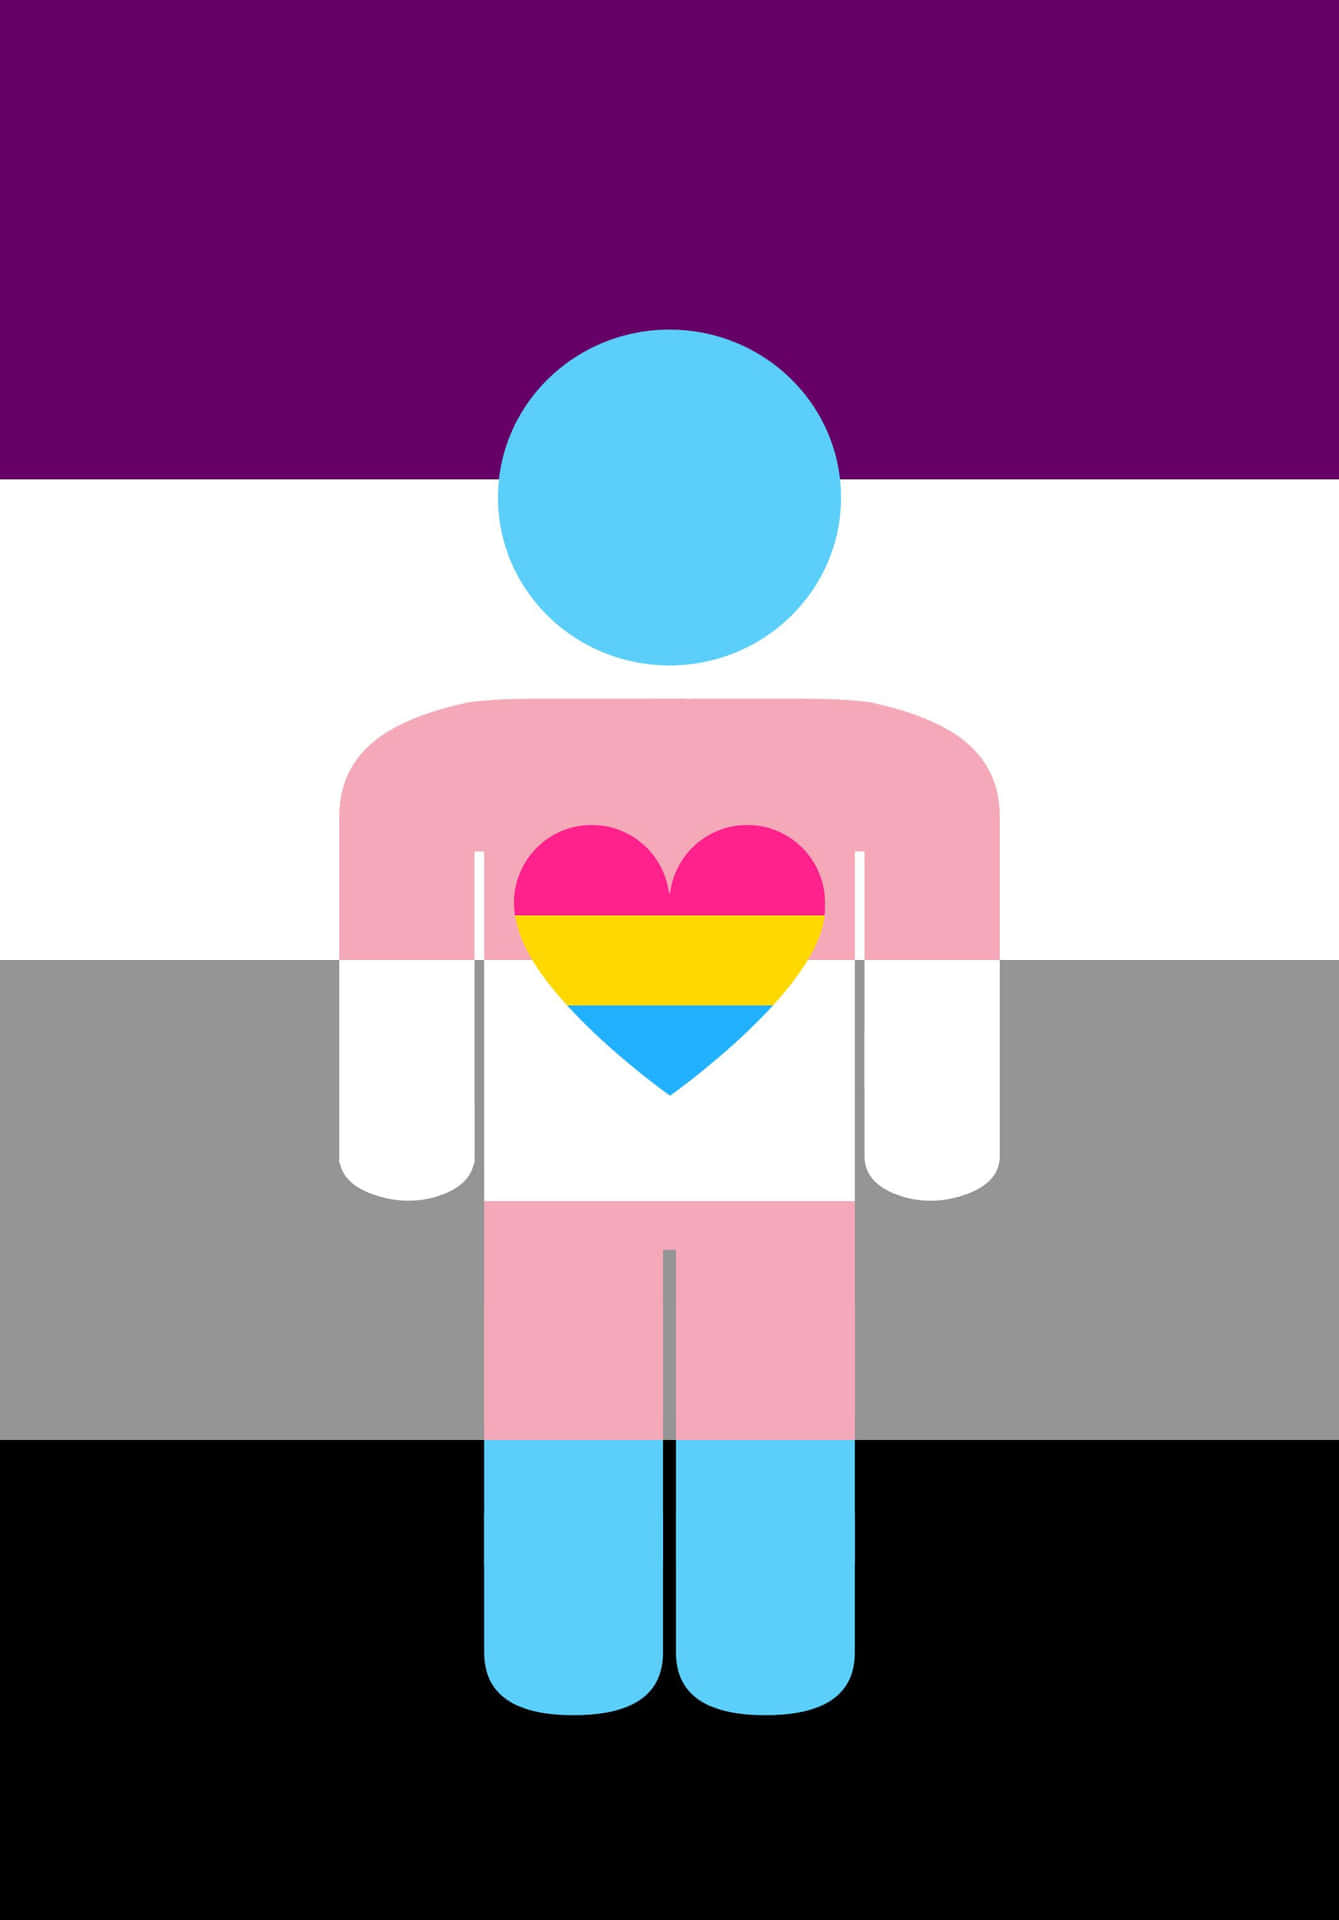 Download Genders Asexual Pansexual And Trans Wallpaper